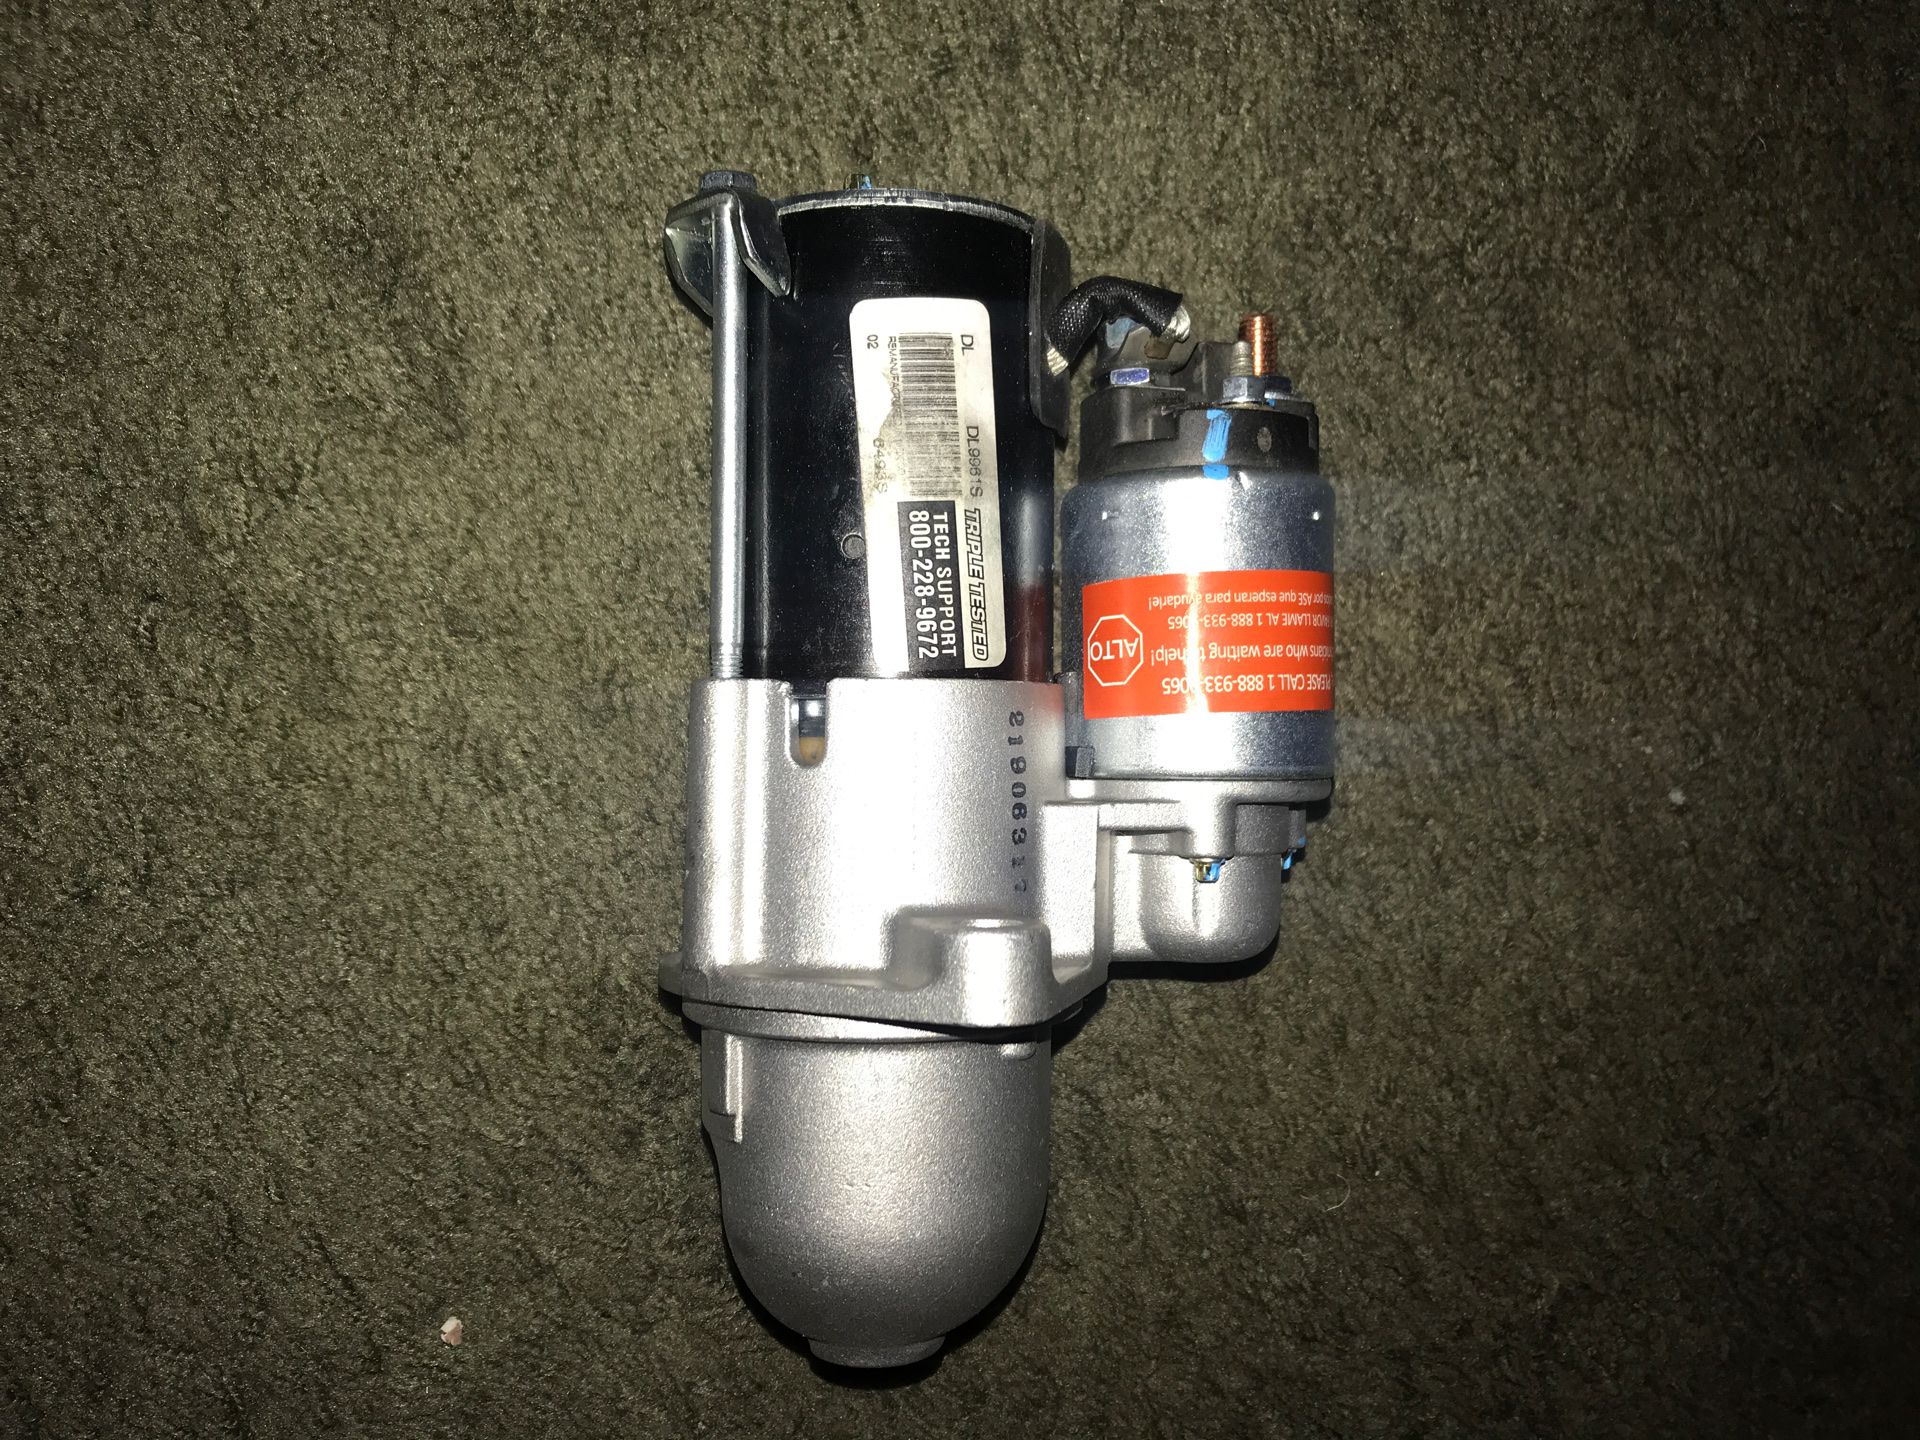 Brand new Starter for 2006 ion Saturn Never used